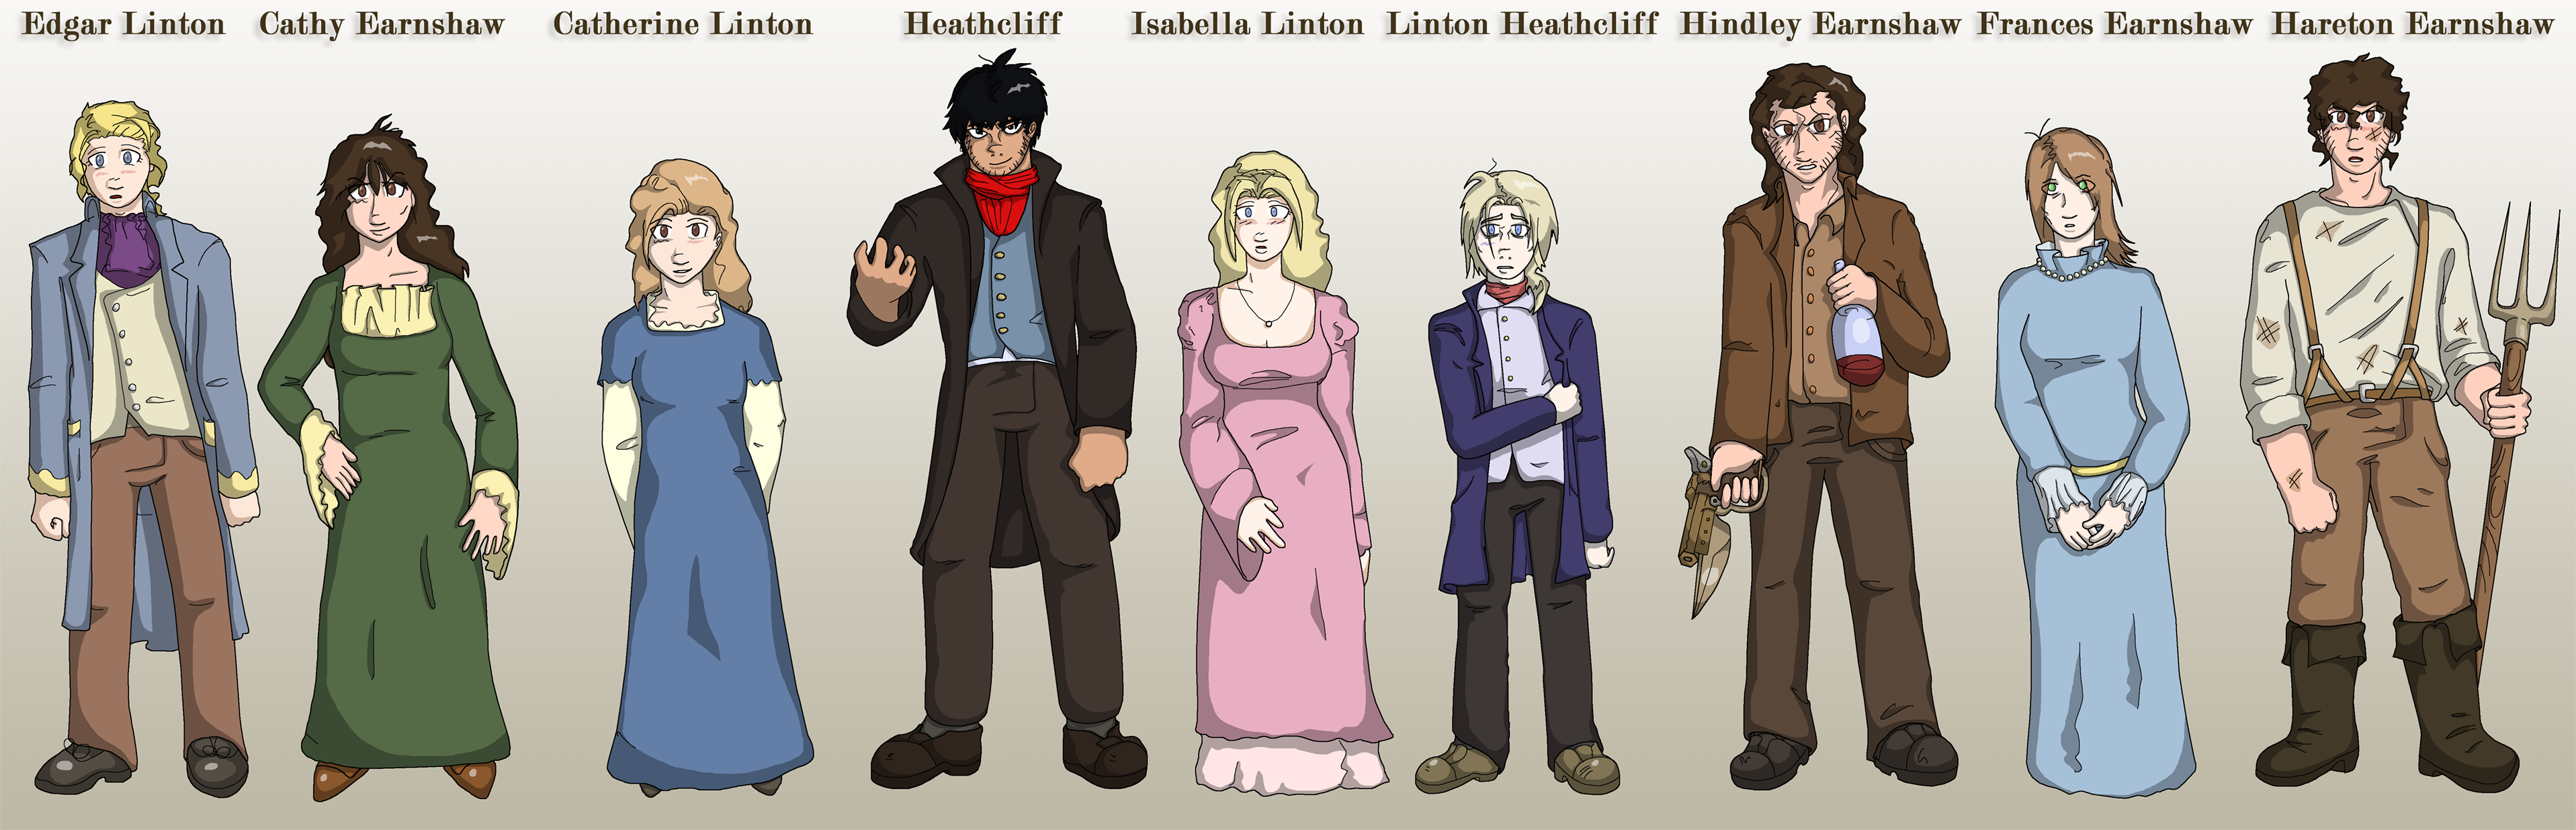 Wuthering heights characters